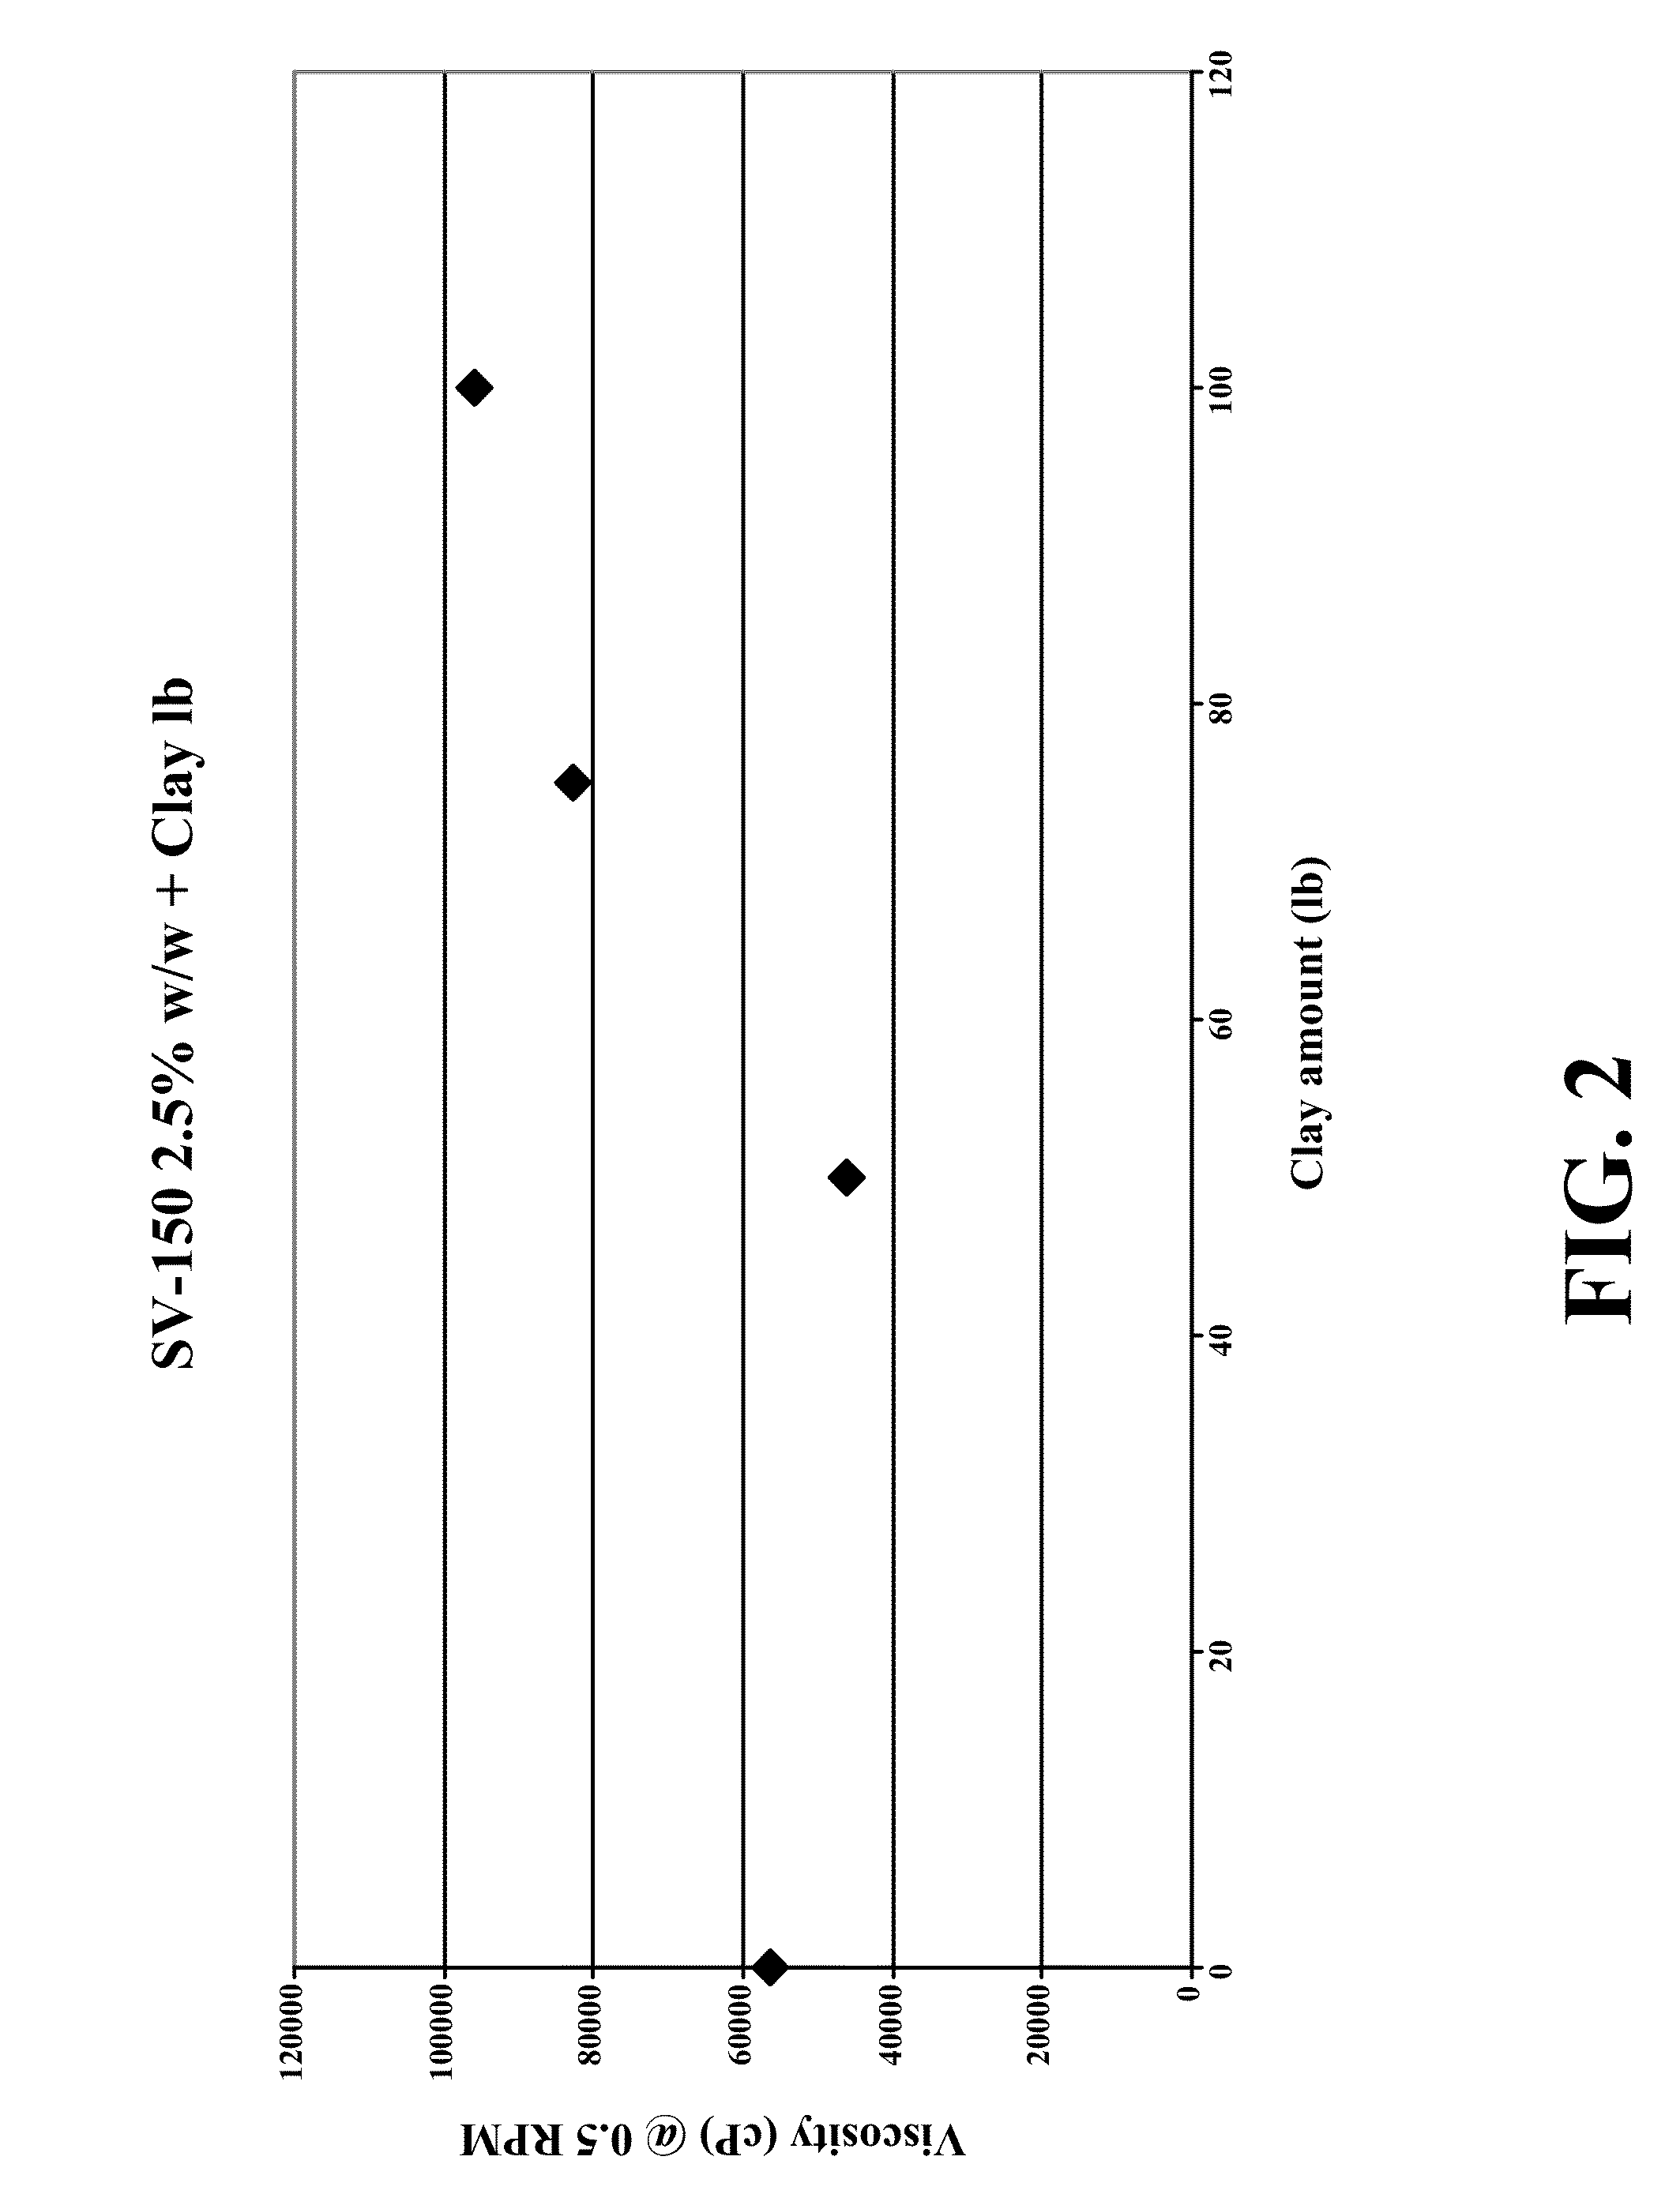 Oil based concentrated slurries and methods for making and using same